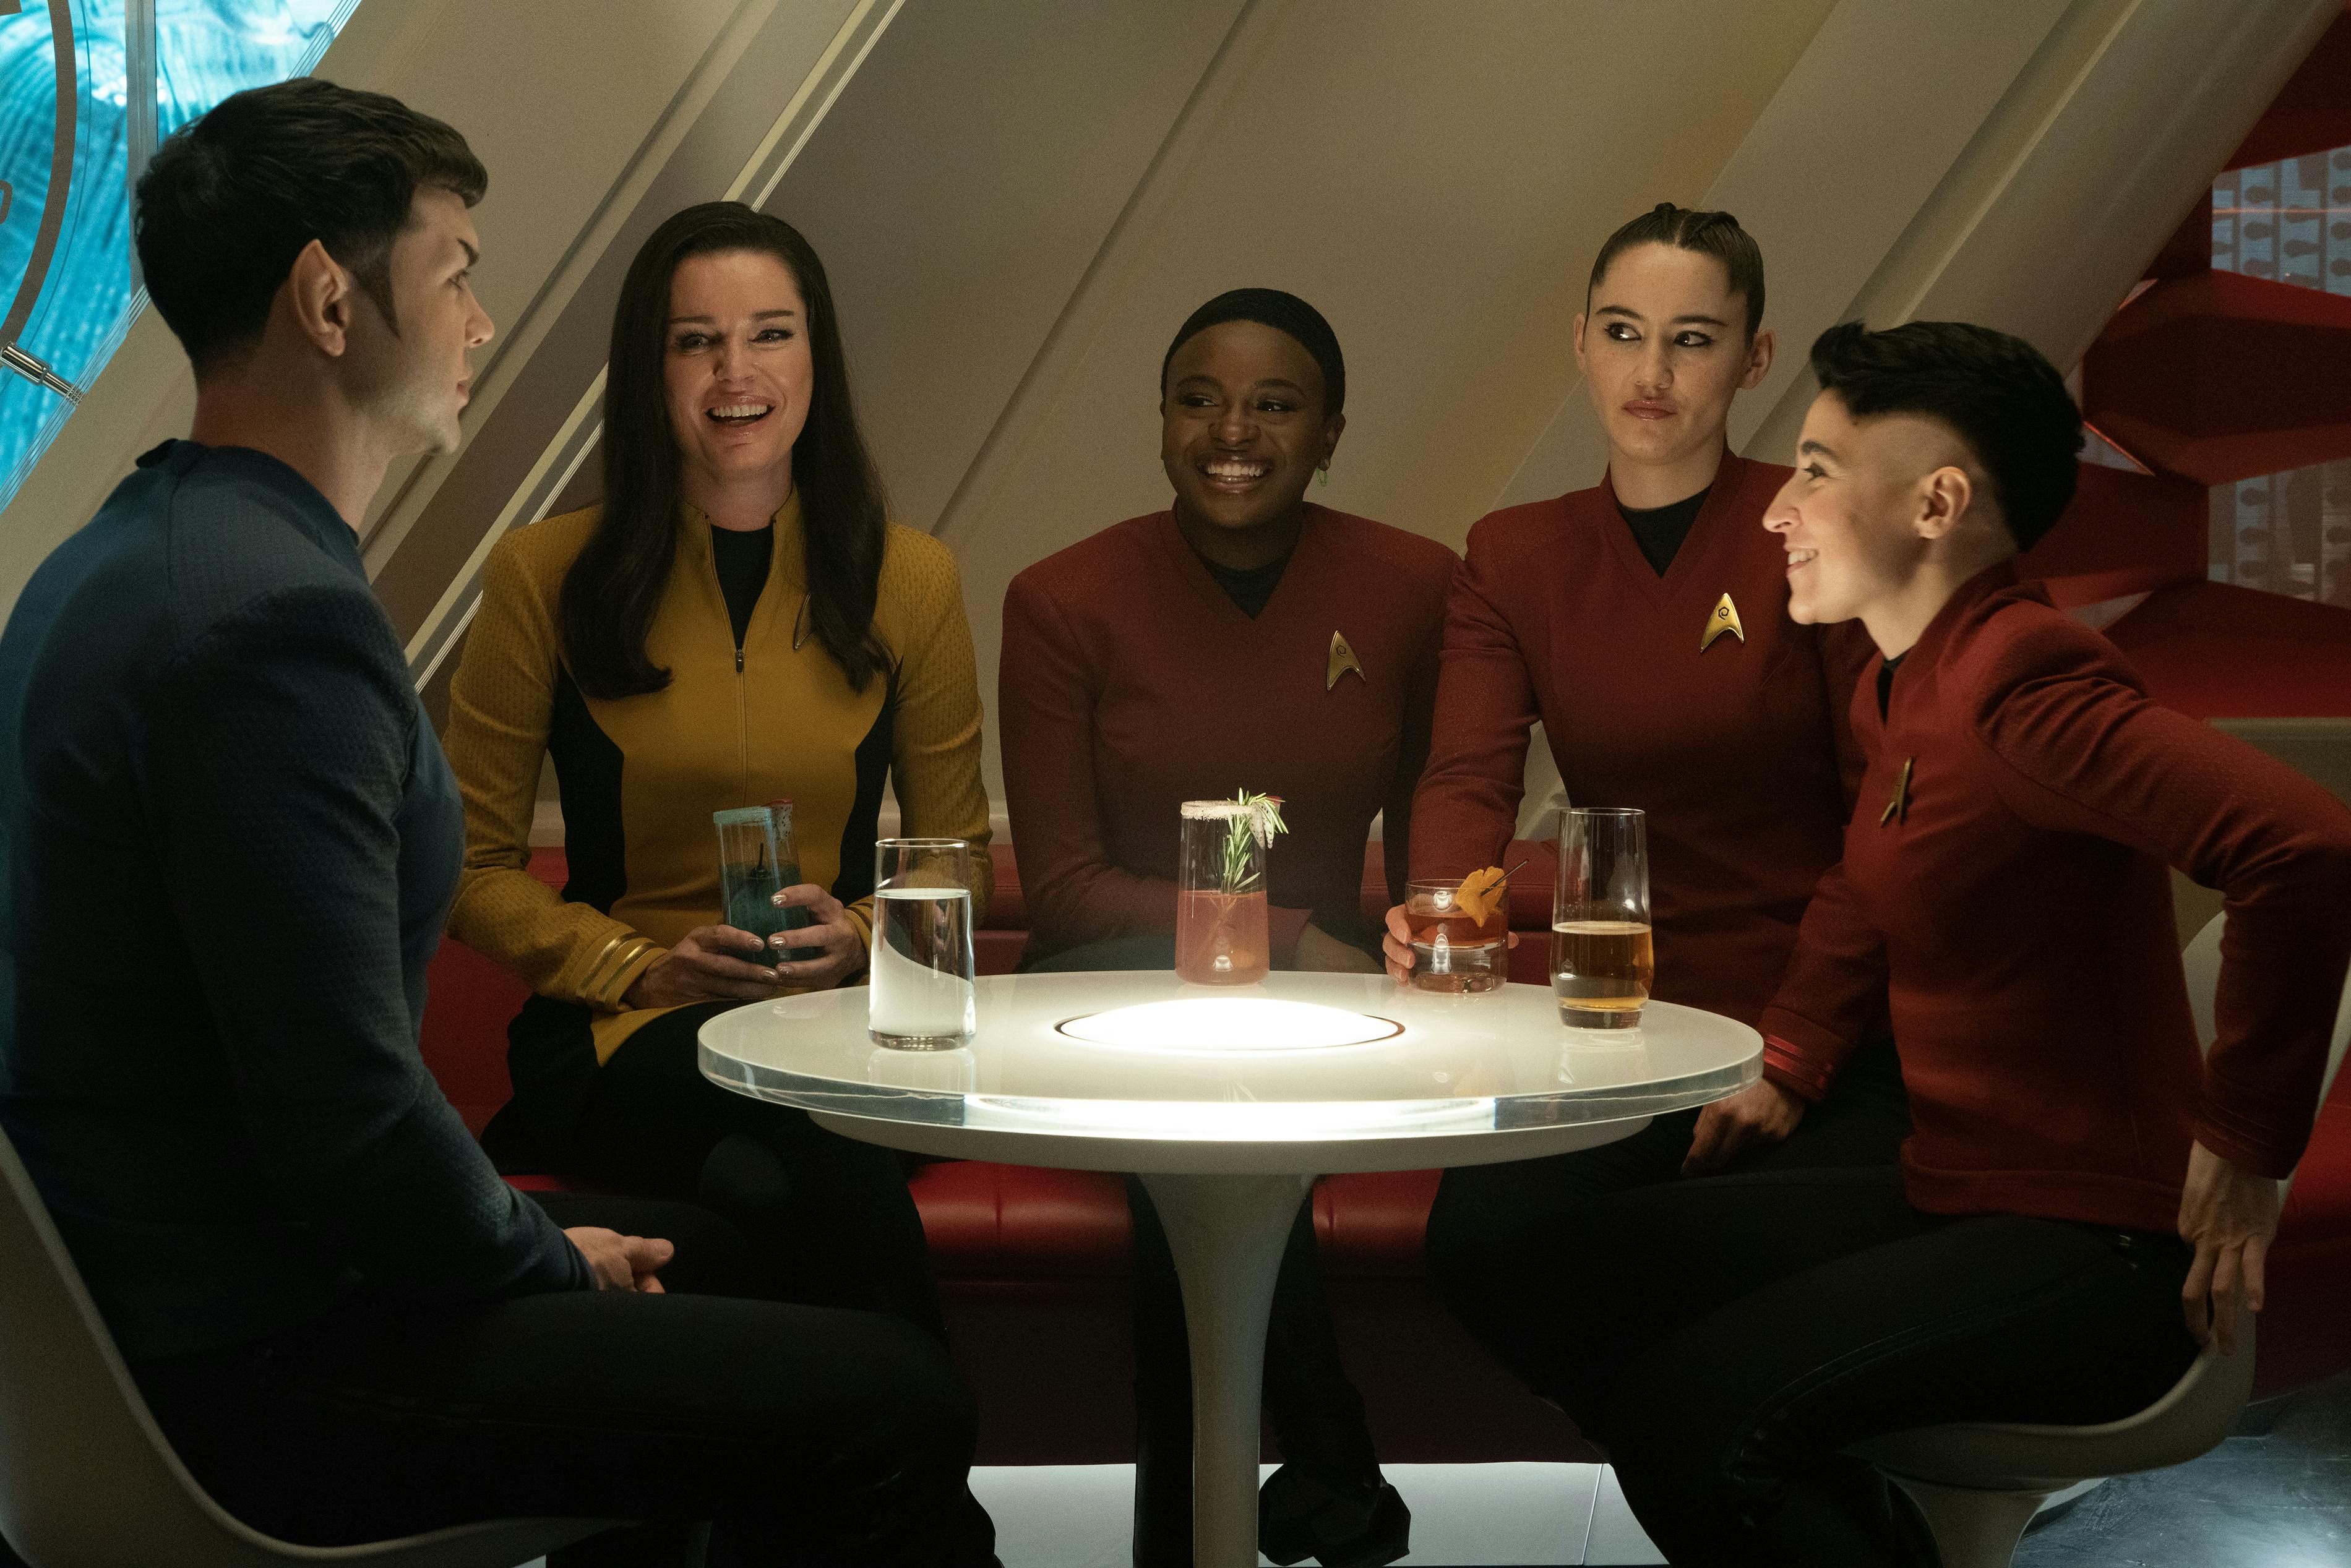 Spock sits in the Enterprise lounge while his friends Number One (Una), Uhura, La'An, and Erica Ortegas are enjoying his company in 'Charades'